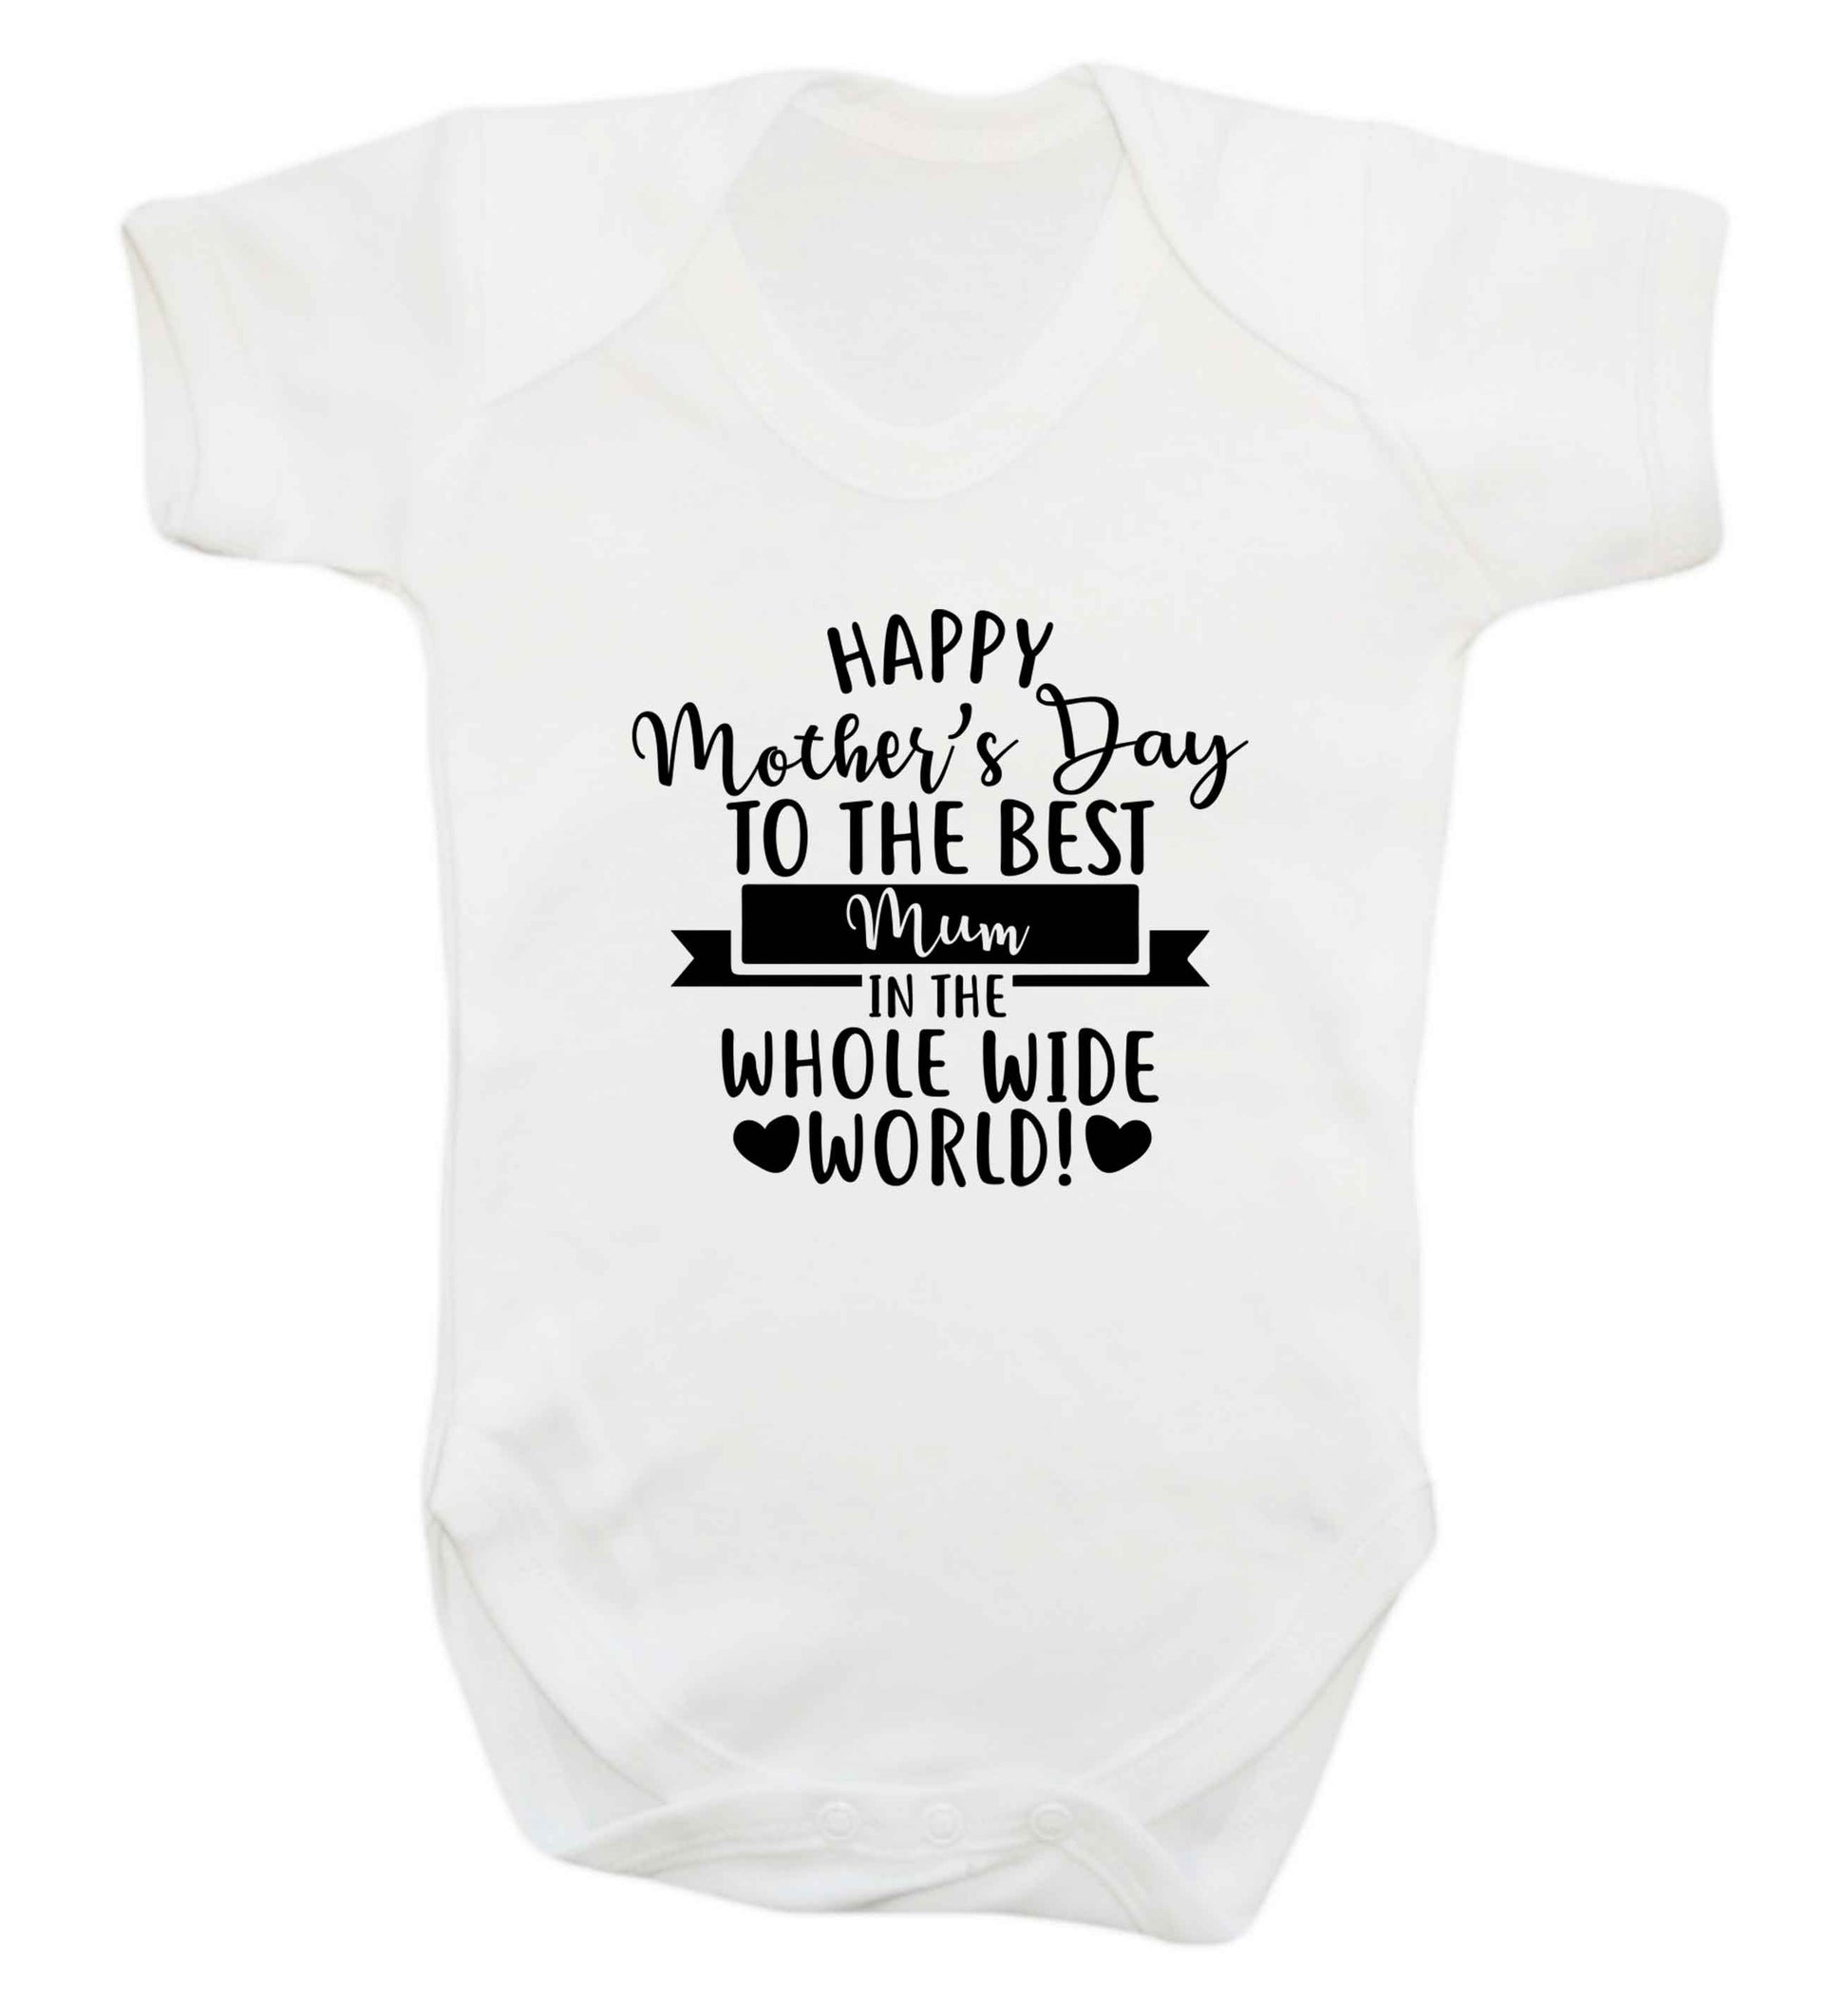 Happy mother's day to the best mum in the world baby vest white 18-24 months